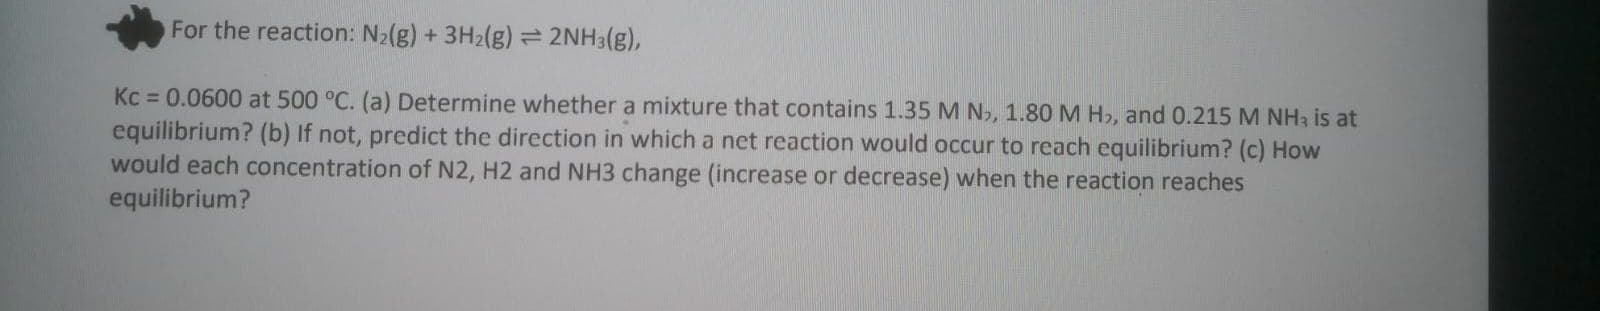 Kc = 0.0600 at 500 °C. (a) Determine whether a mixture that contains 1.35 M N, 1.80 M H,, and 0.215 M NHa is at
equilibrium? (b) If not, predict the direction in which a net reaction would occur to reach equilibrium? (c) How
would each concentration of N2, H2 and NH3 change (increase or decrease) when the reaction reaches
equilibrium?
